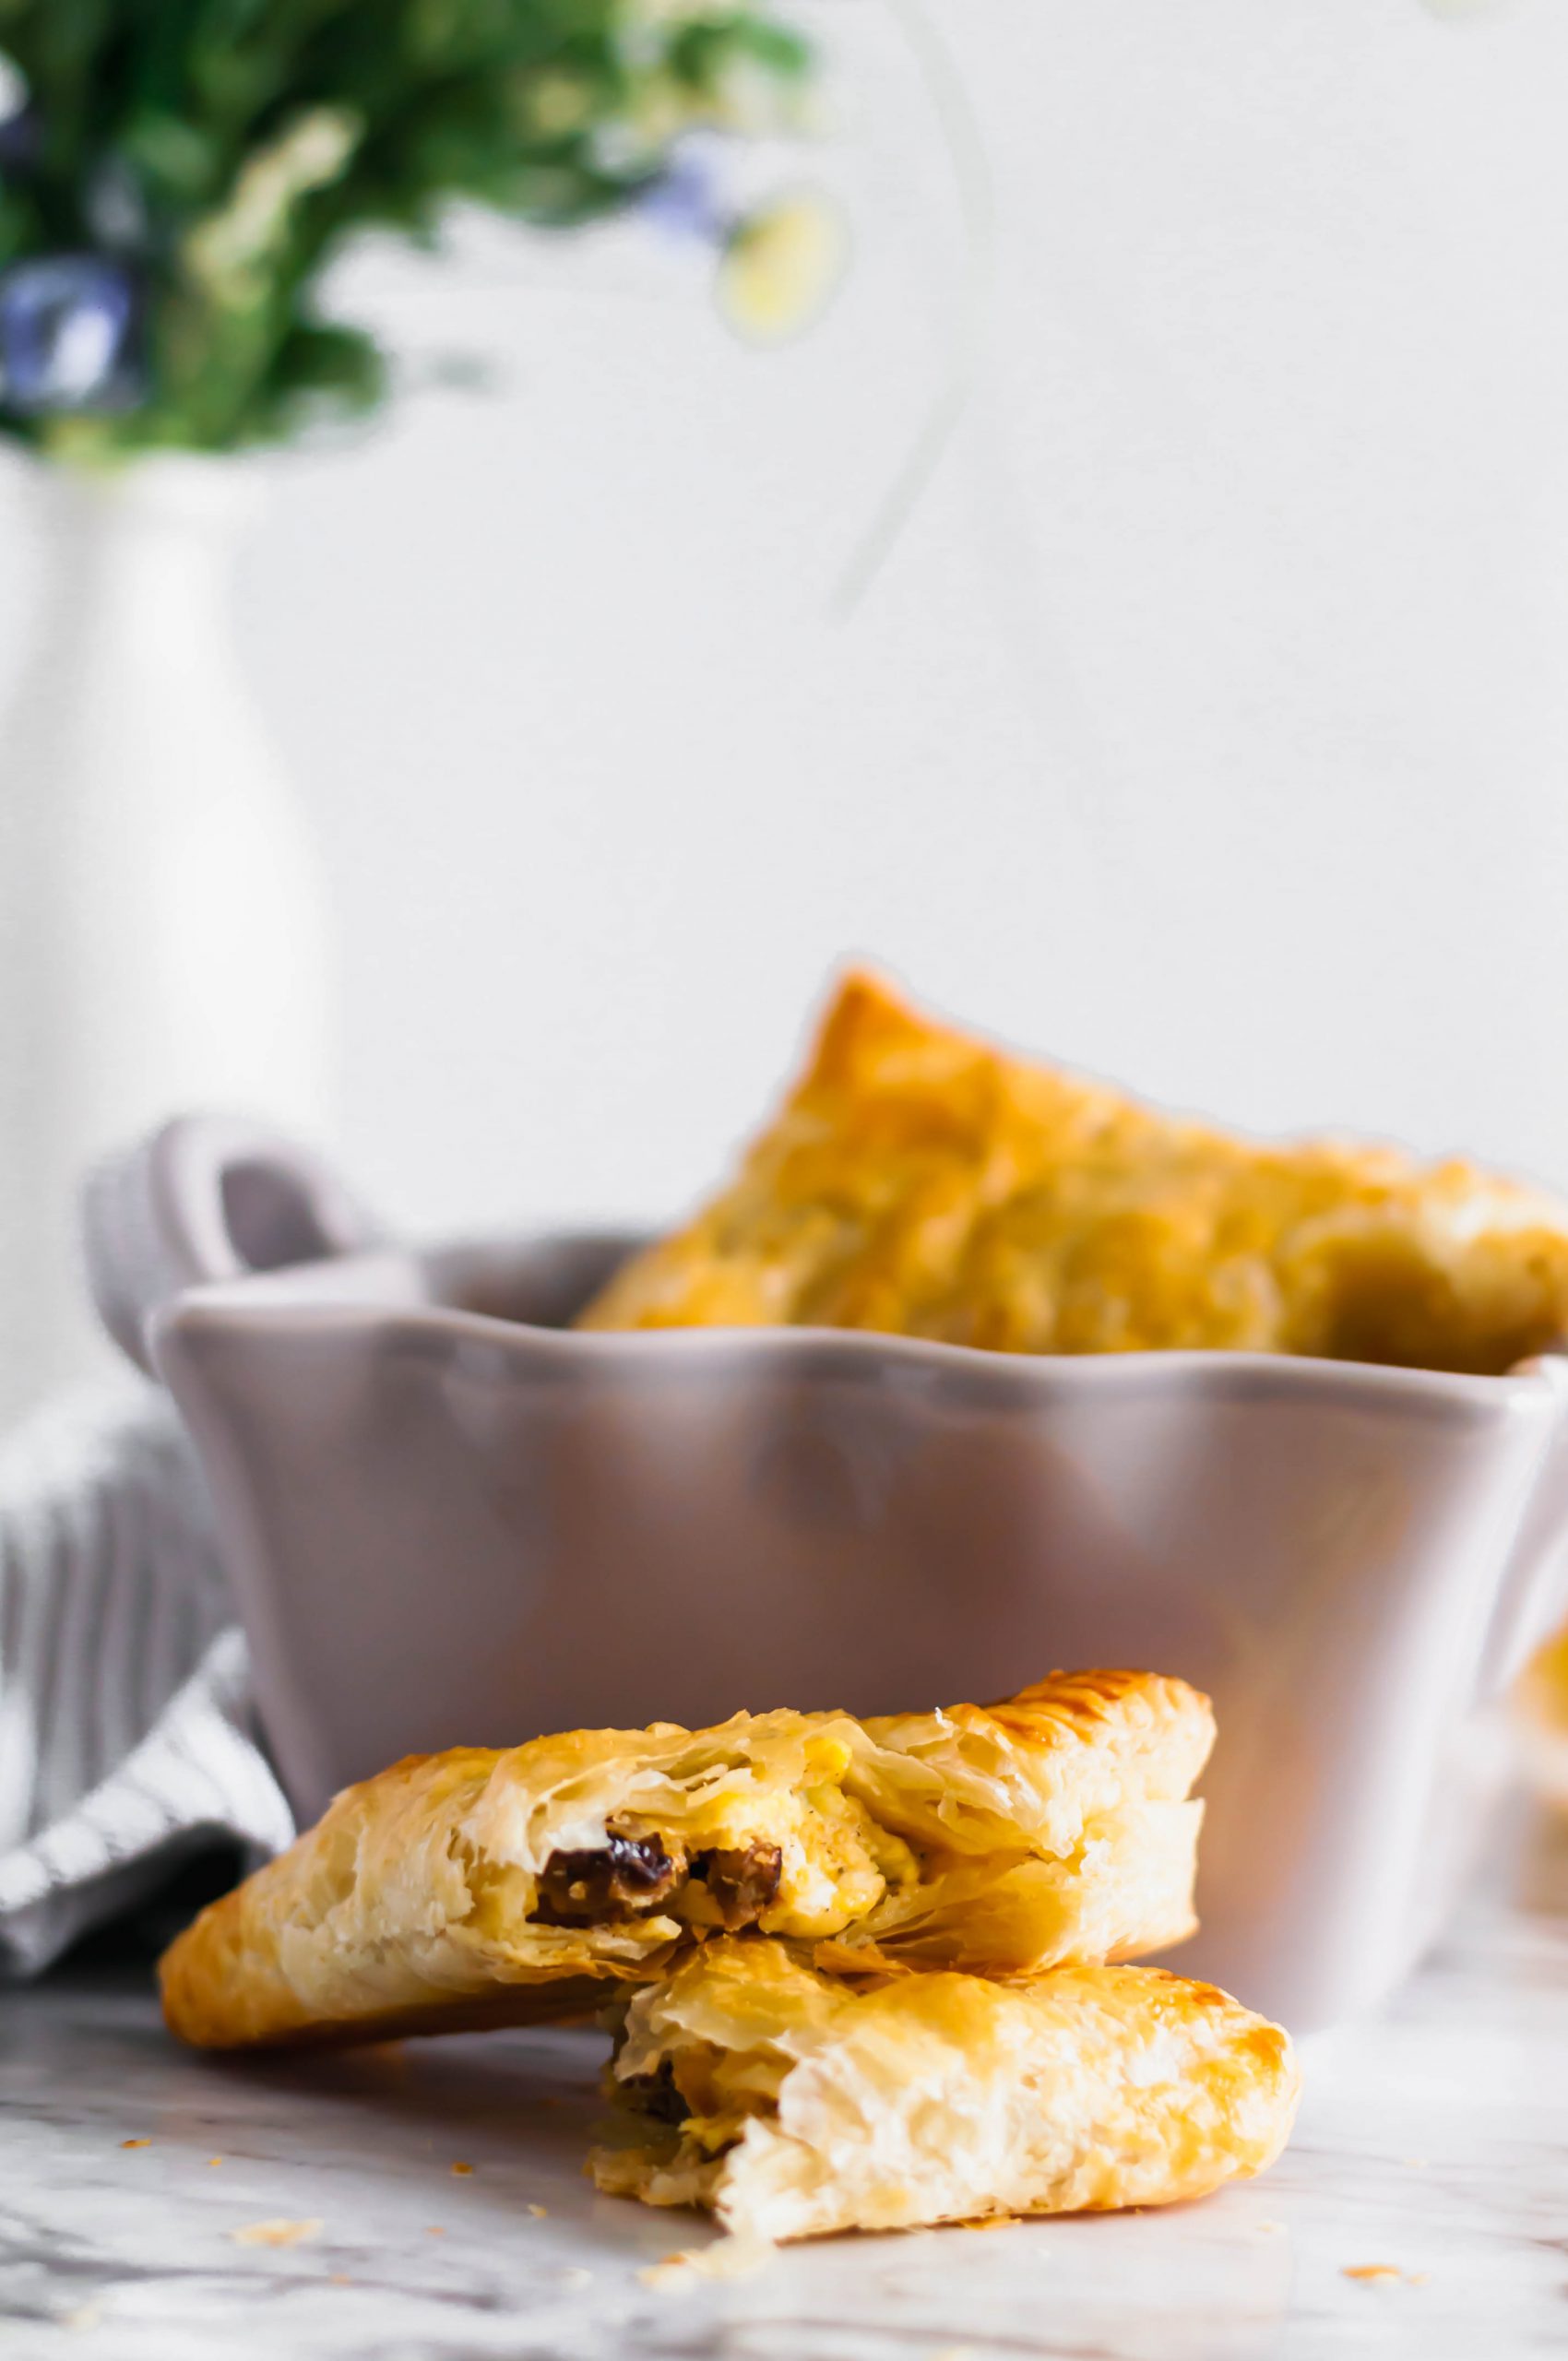 These Savory Turnovers are going to turn into your favorite brunch item. Flaky puff pastry filled with tender scrambled eggs, breakfast sausage and shredded sharp cheddar.